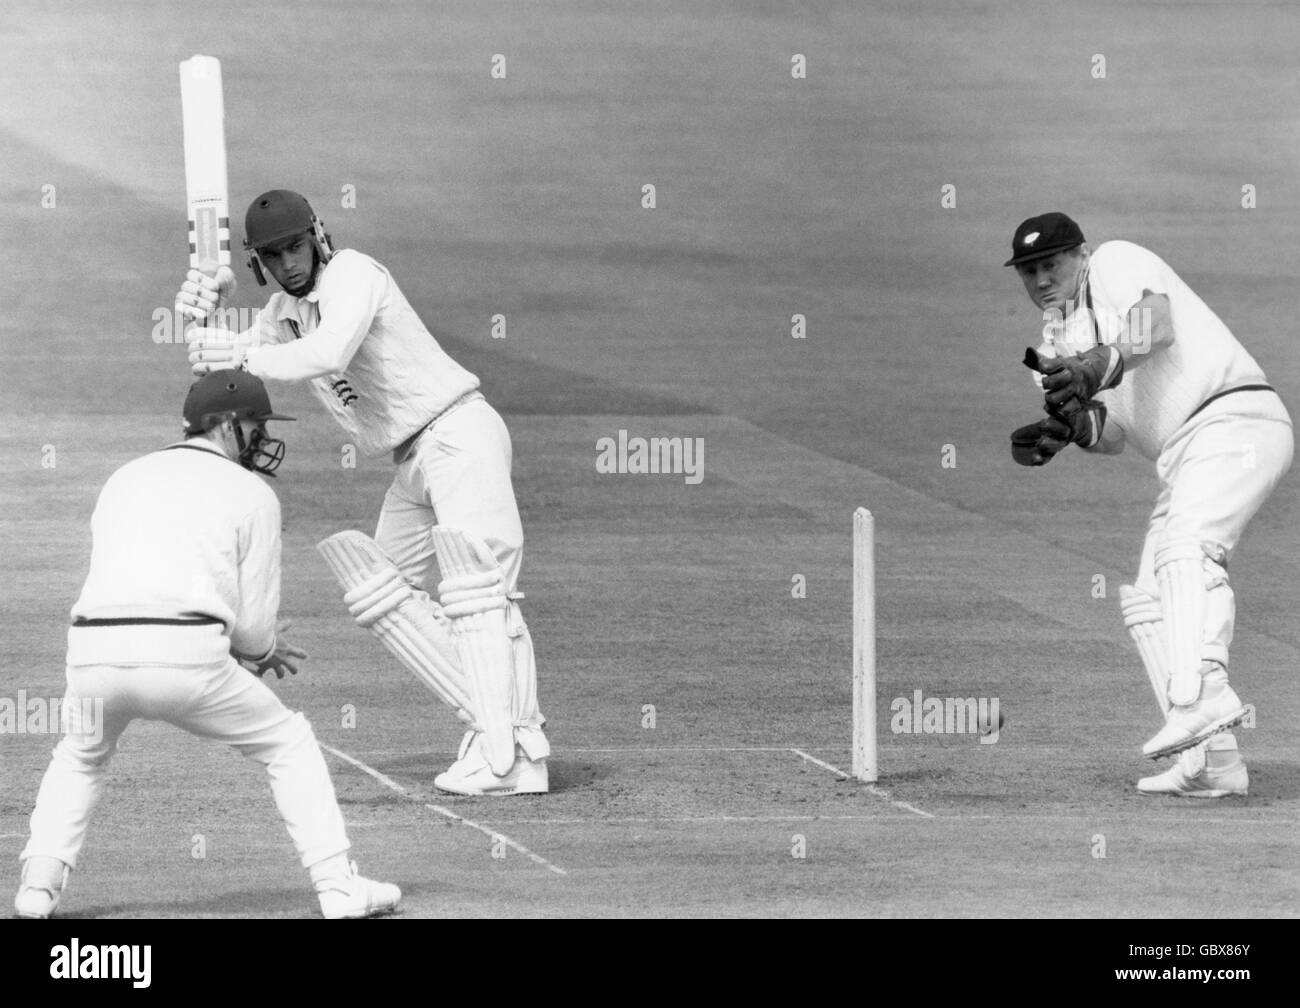 cricket - Britannic Assurance County Championship - Middlesex v Yorkshire - Lord's cricket Ground. Middlesex's Mark Ramprakash strokes the ball past Yorkshire wicketkeeper David Bairstow Stock Photo